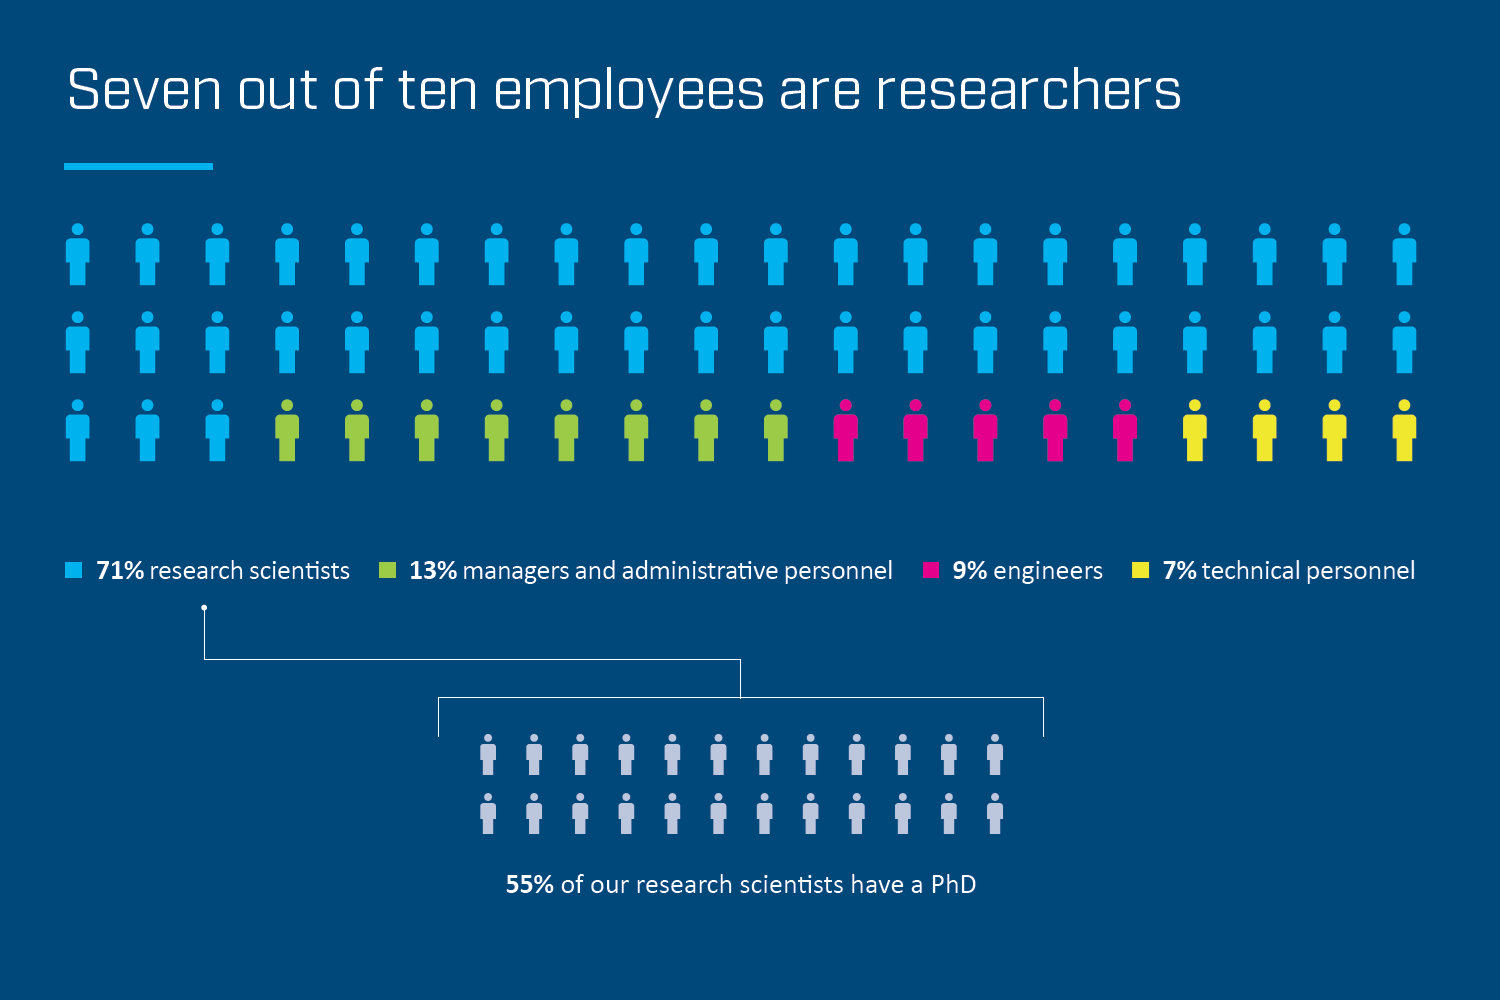 Seven out of ten employees are researchers